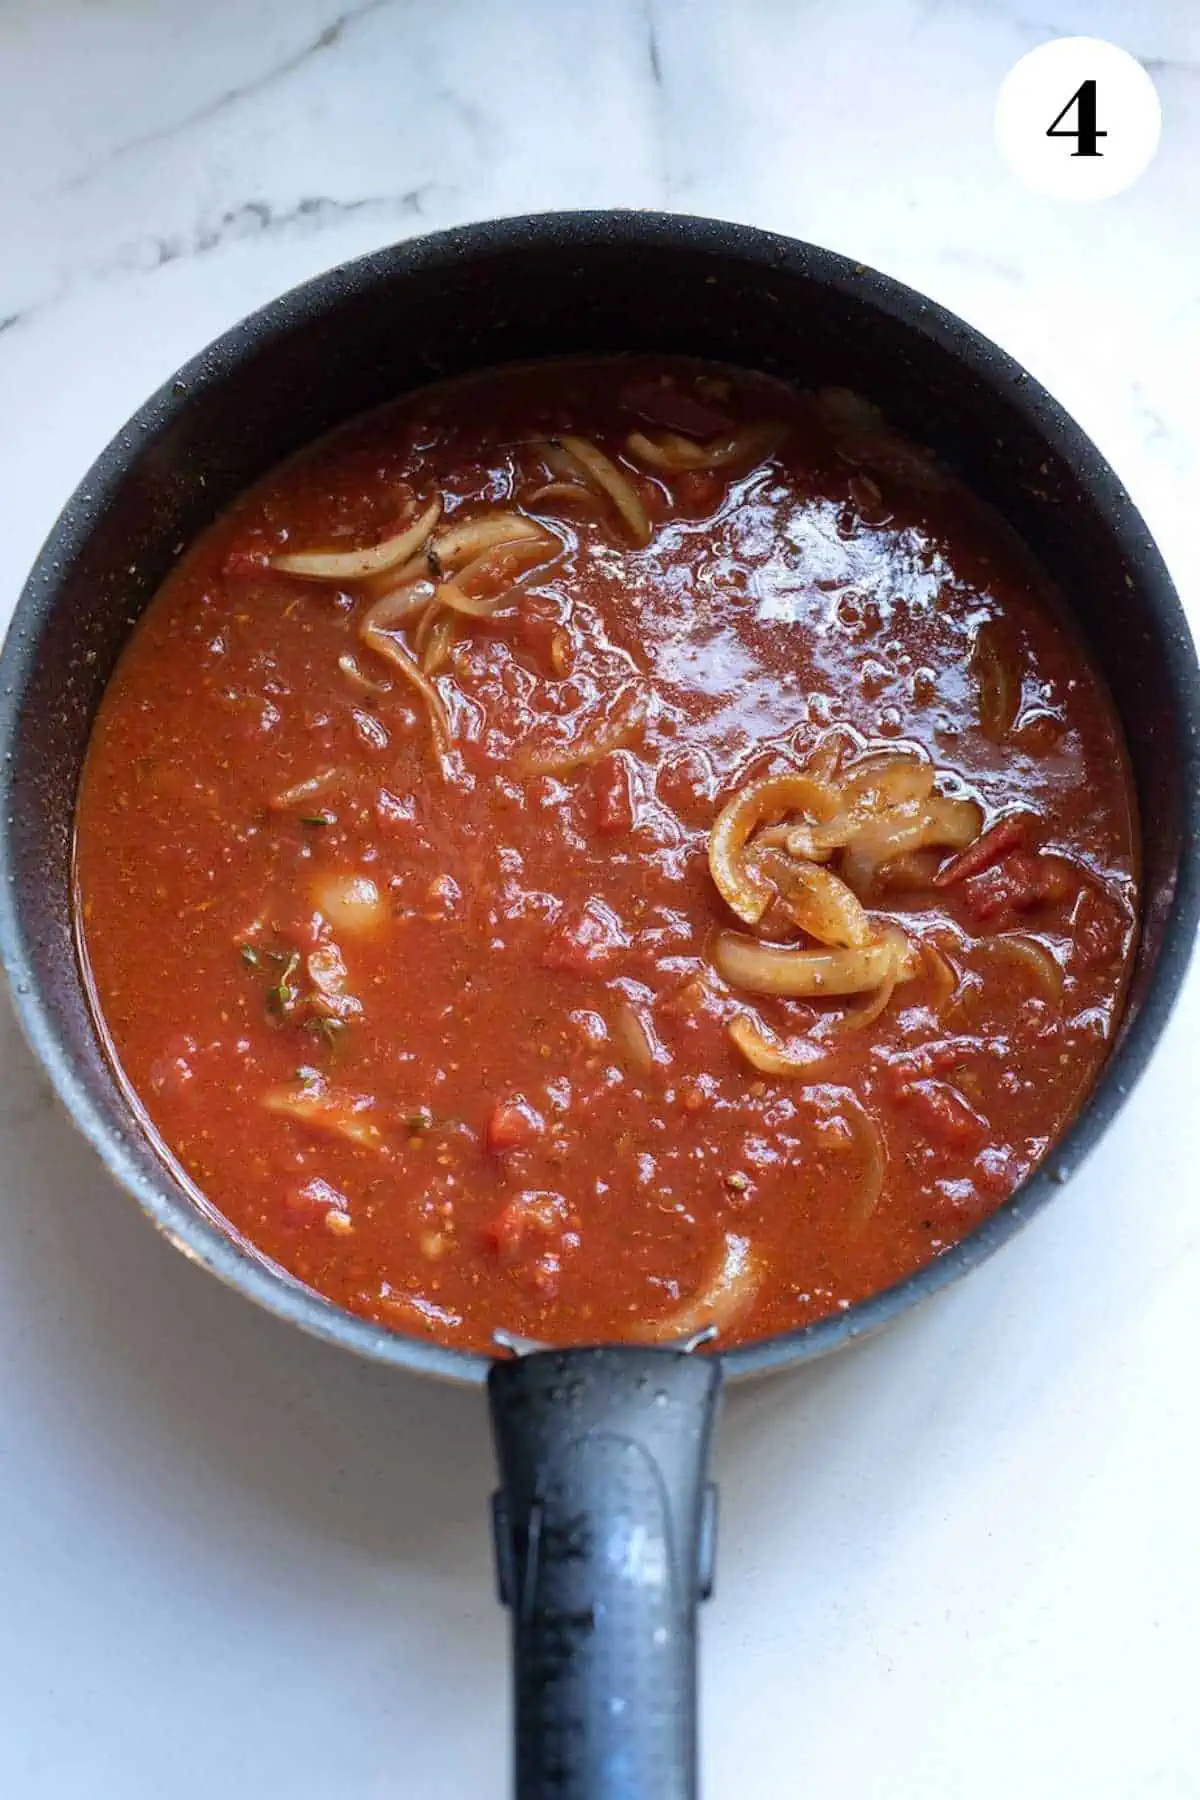 Tomato sauce simmering in a cast iron pan.